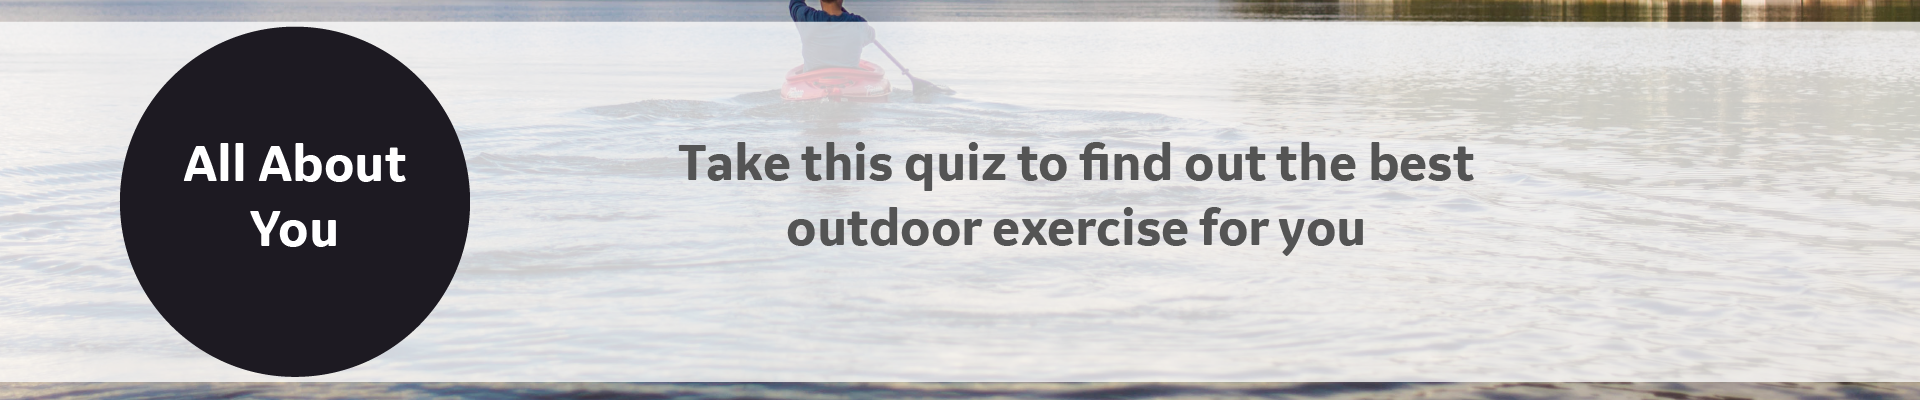 Outdoor workout style quiz